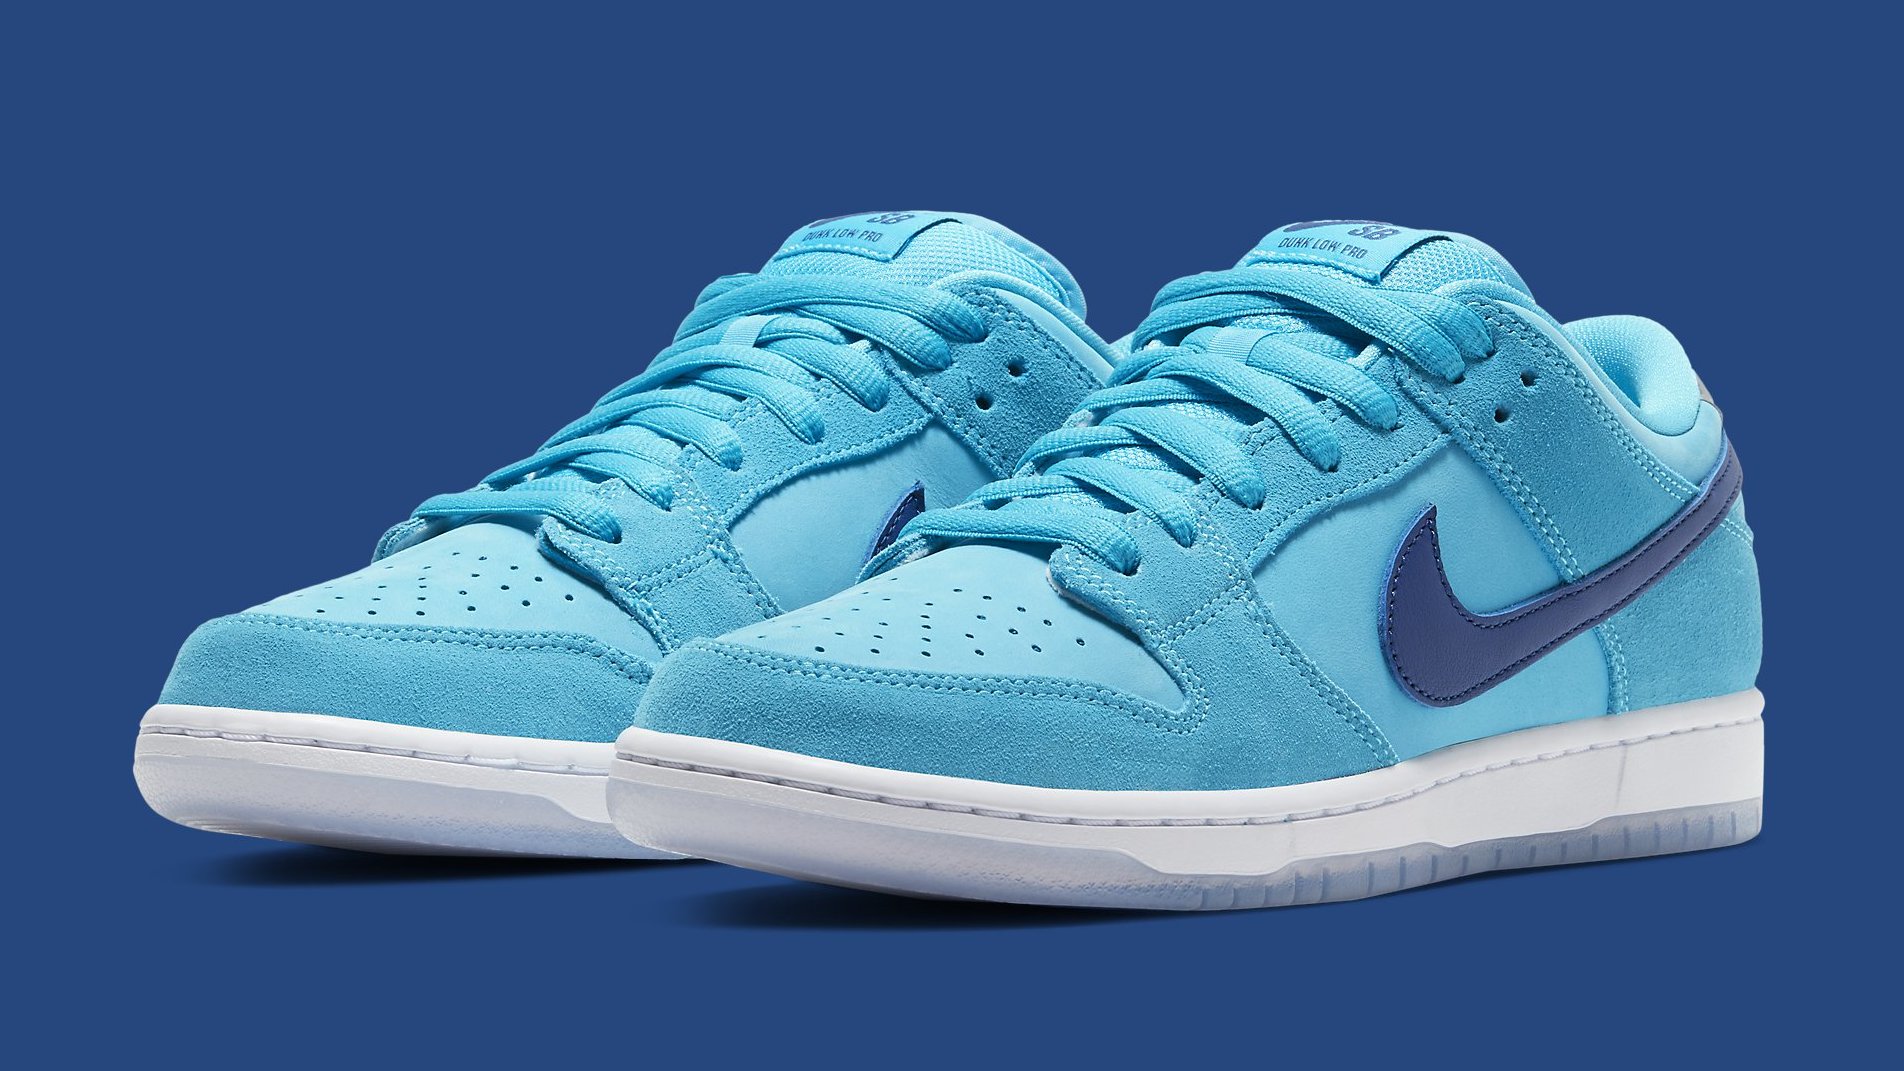 Best Look Yet at the 'Blue Fury' SB Dunk Low | Complex